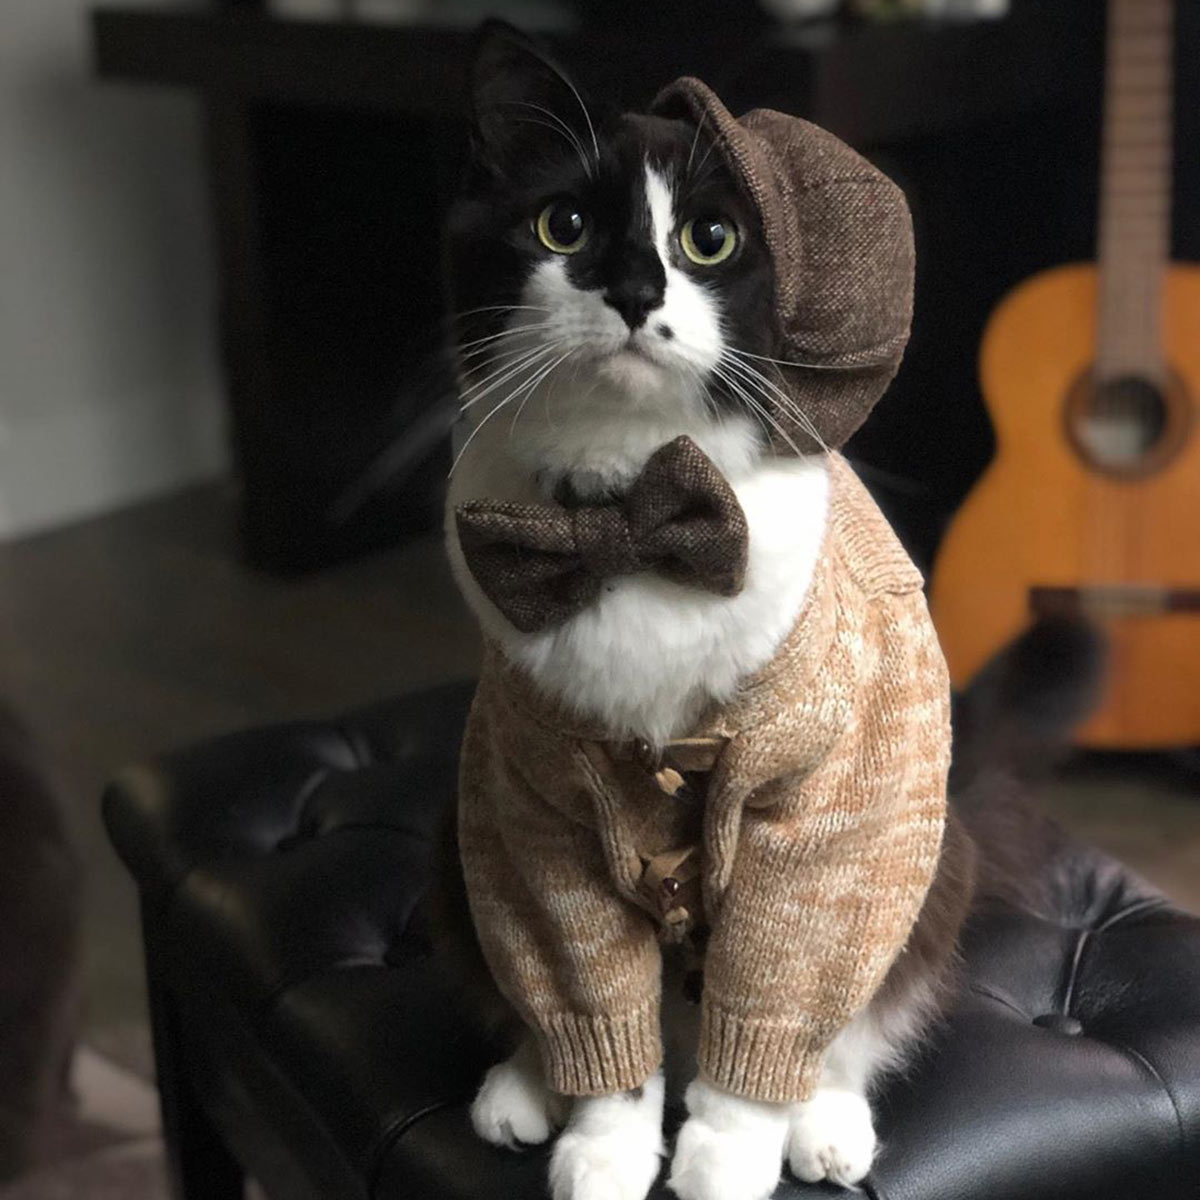 These cute cats dressed up Will Make Your Day Better